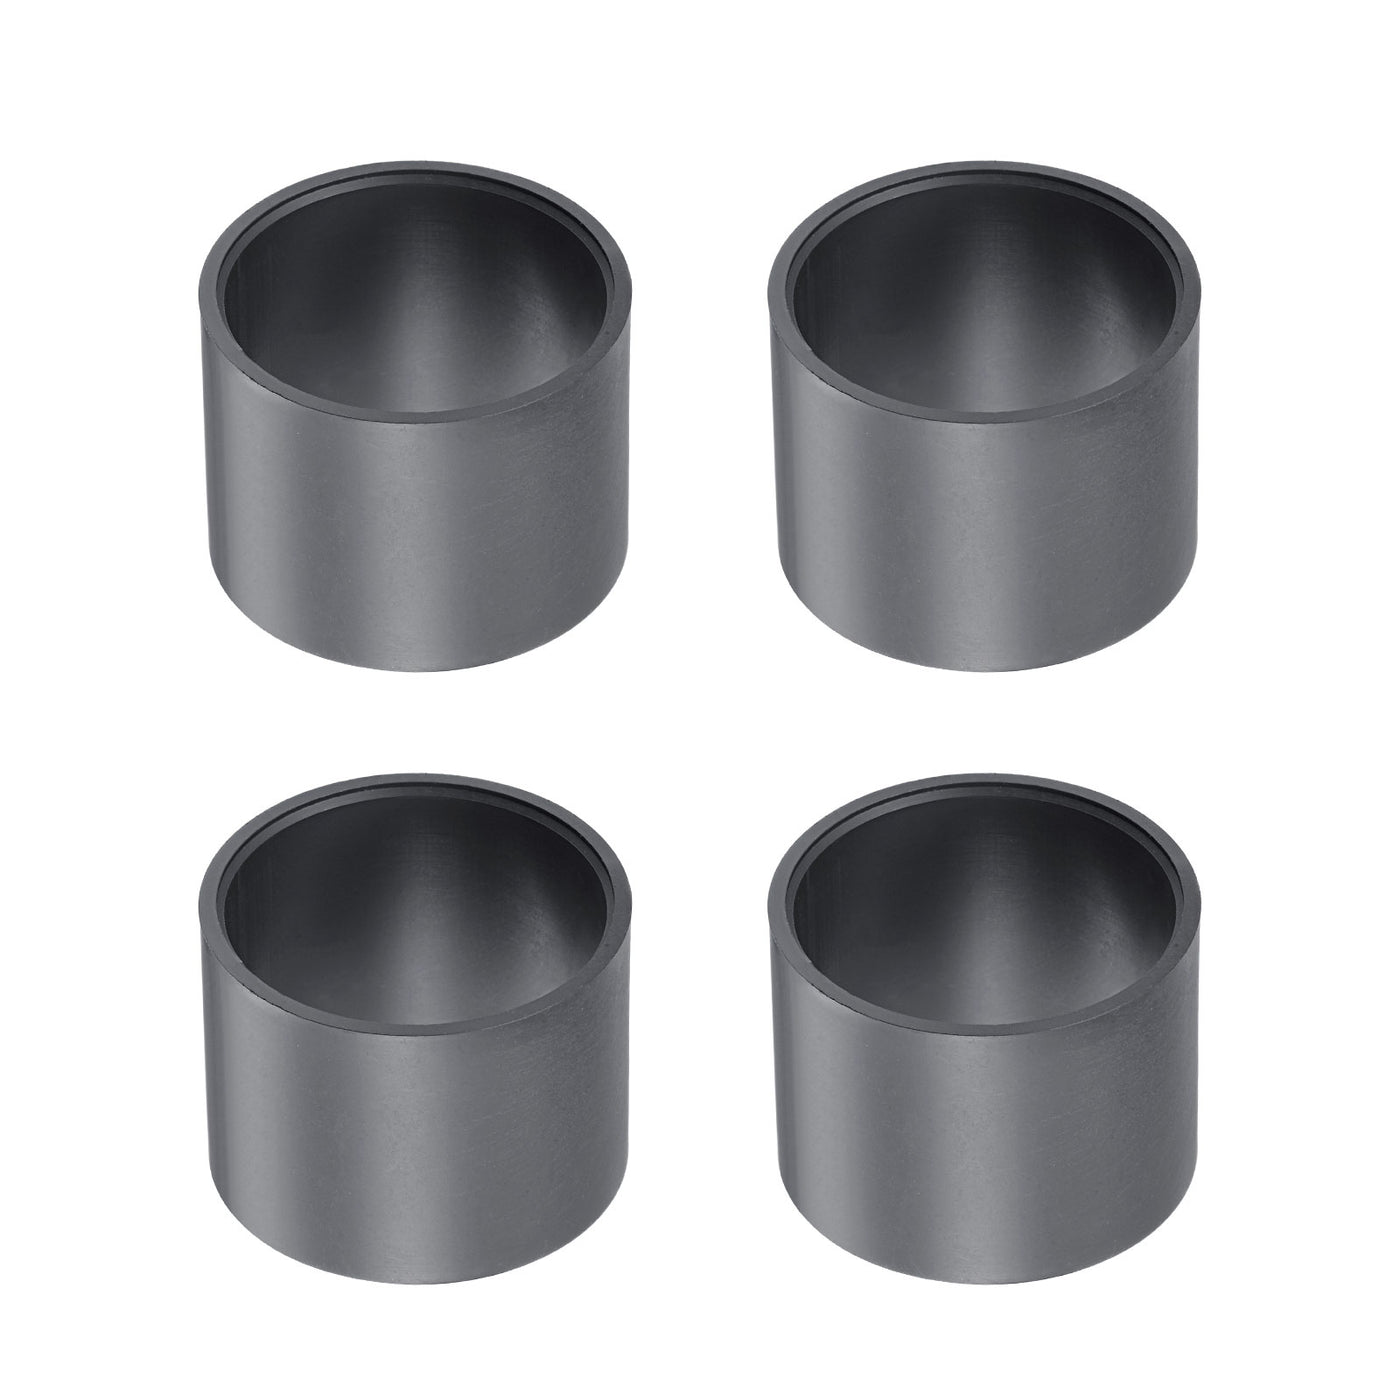 uxcell Uxcell Sleeve Bearings 30mmx34mmx26mm POM Wrapped Oilless Bushings Black 4pcs